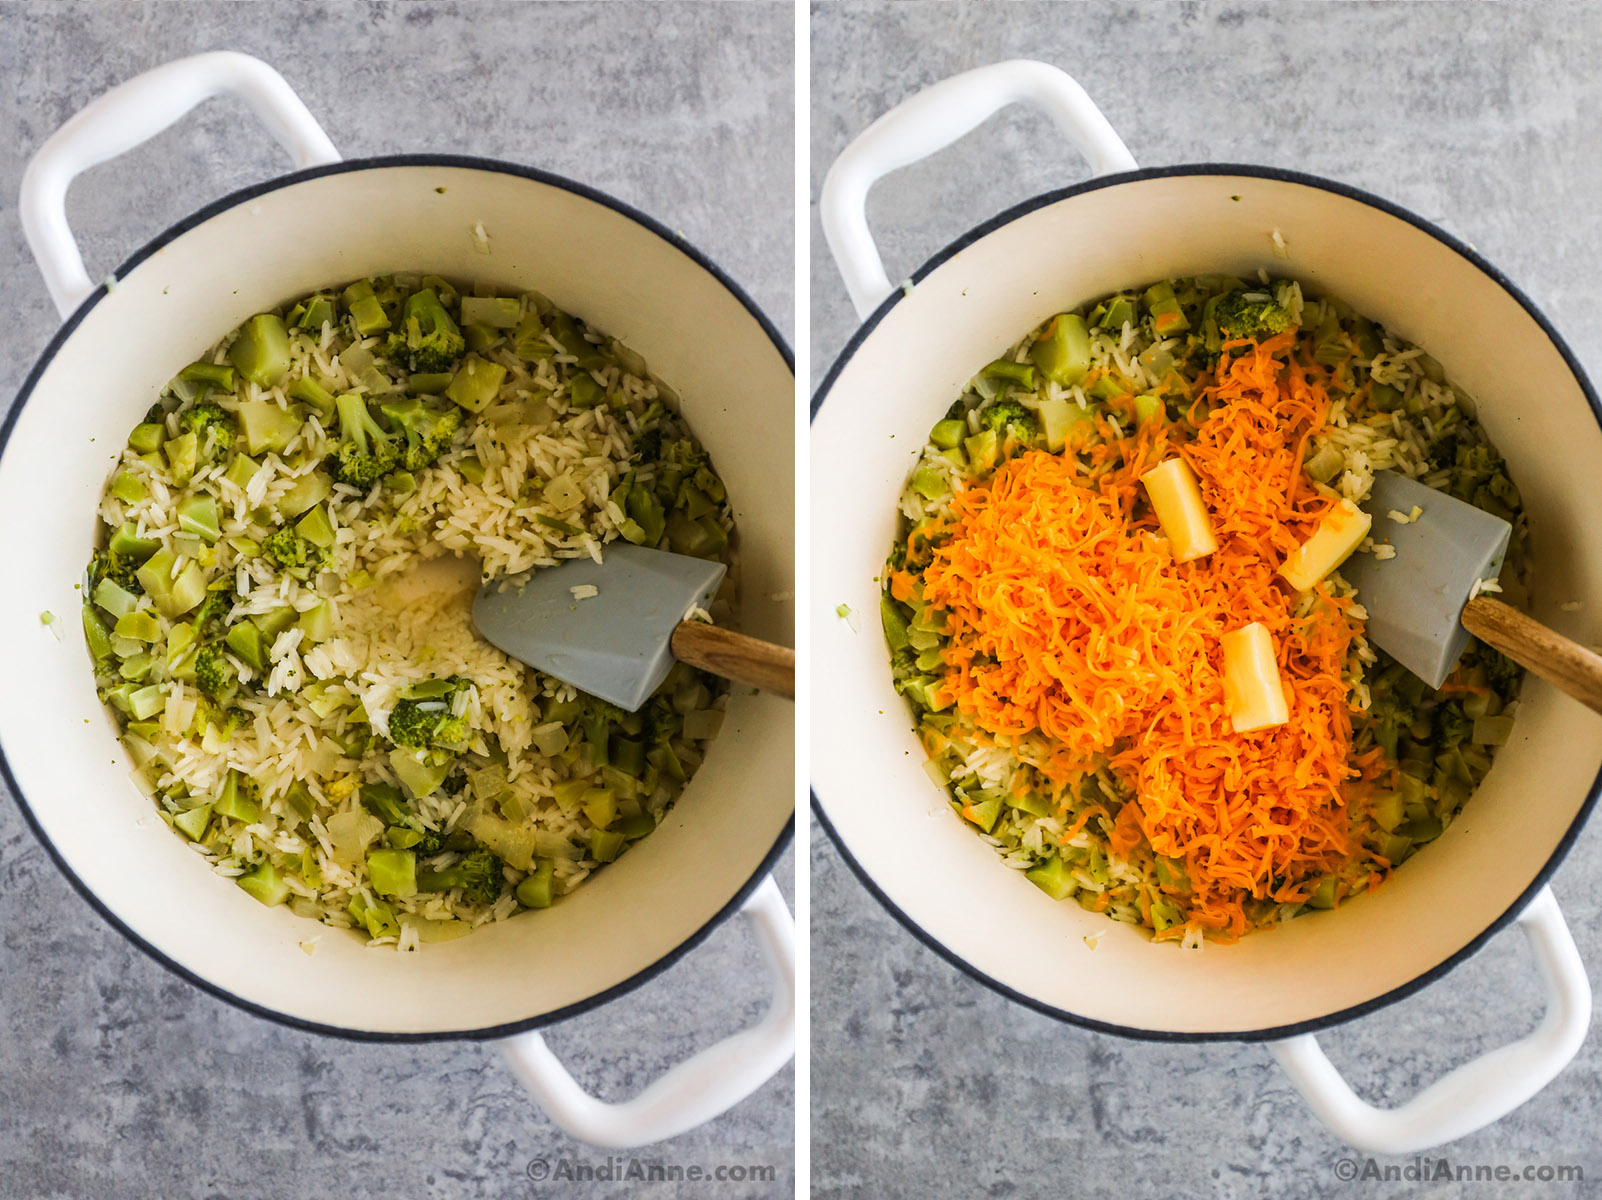 Two images of a white pot, first with cooked rice and broccoli, second with cheese and butter dumped on top.